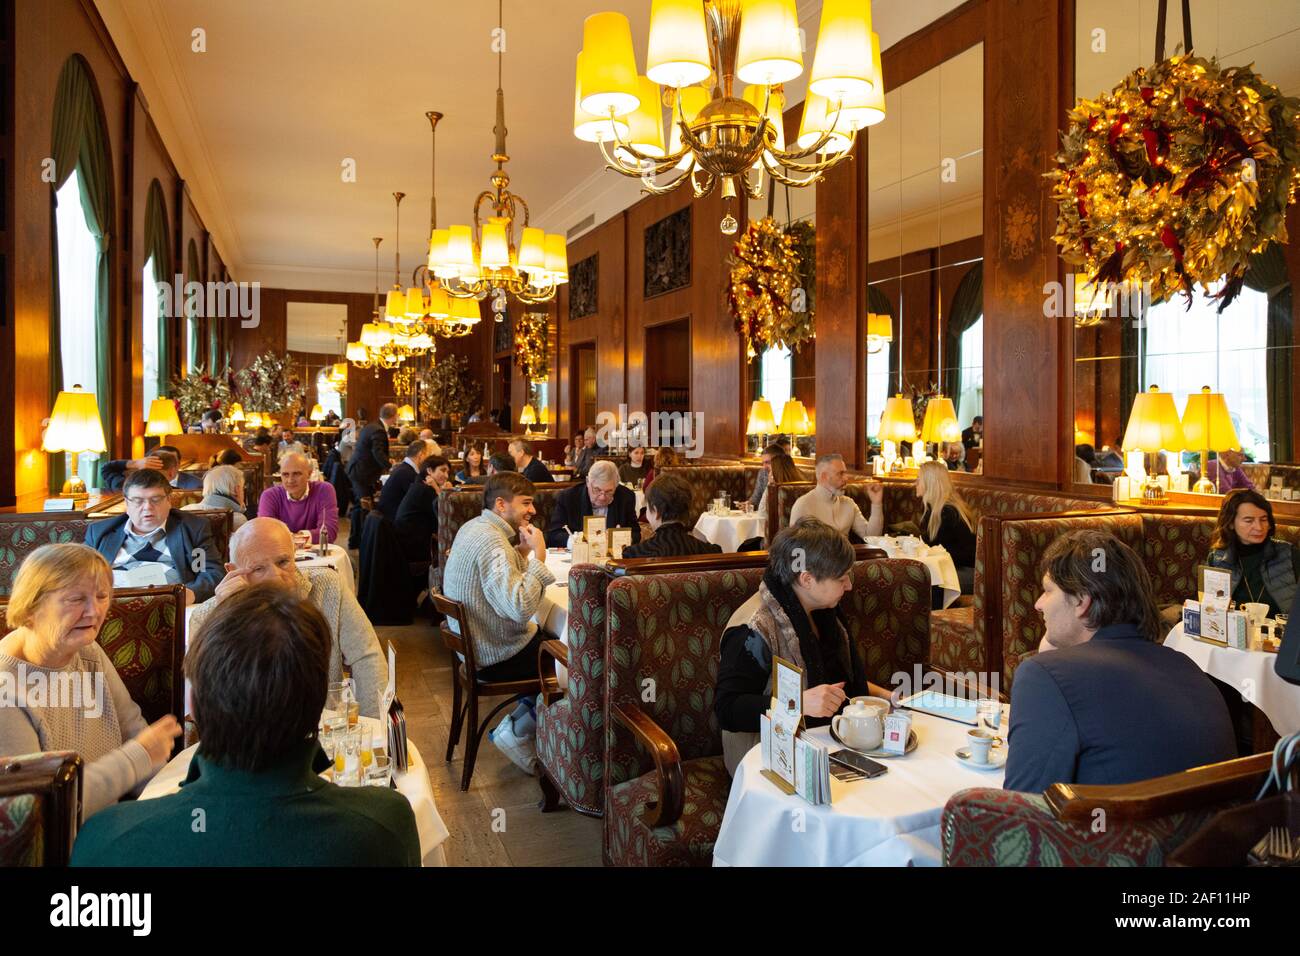 Vienna Coffee house - people having coffee and breakfast in the interior of the ornate Cafe Landtmann, Vienna, Austria Europe Stock Photo